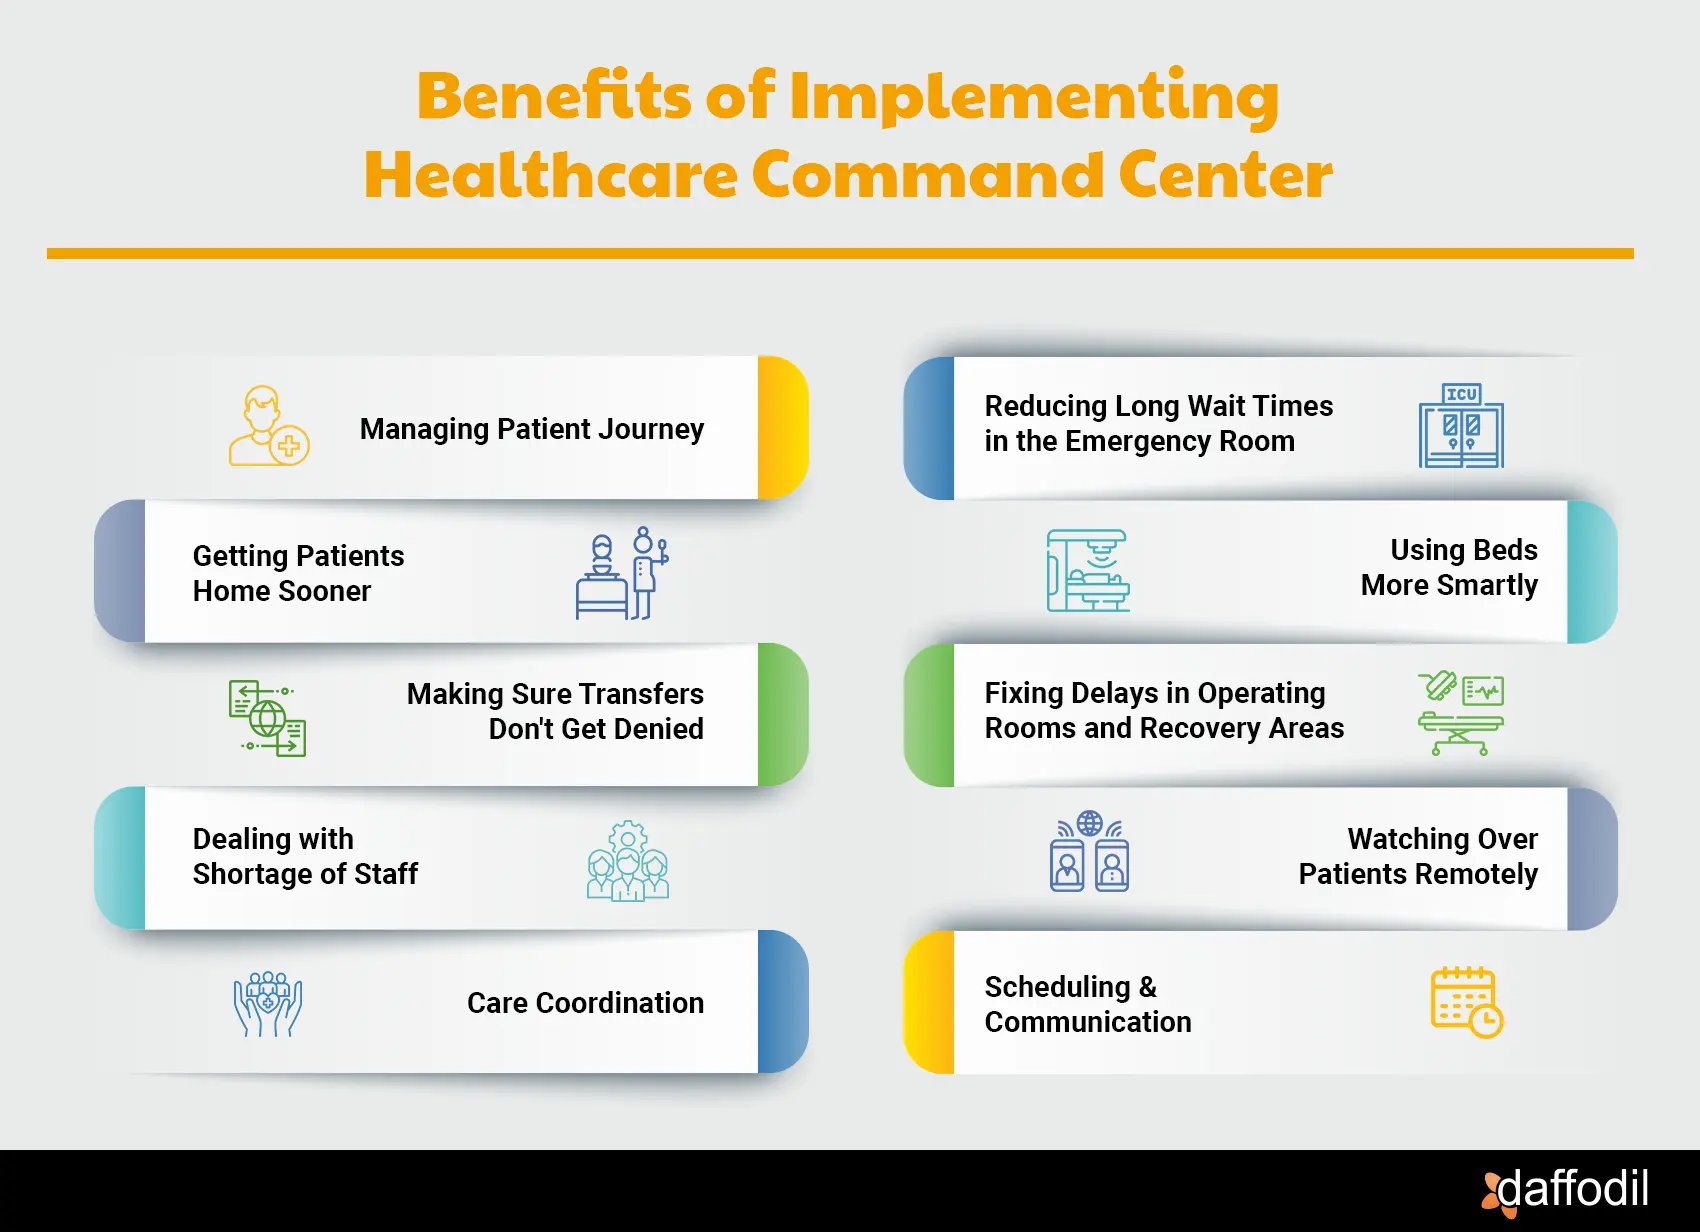 Benefits of implementing Healthcare Command Center